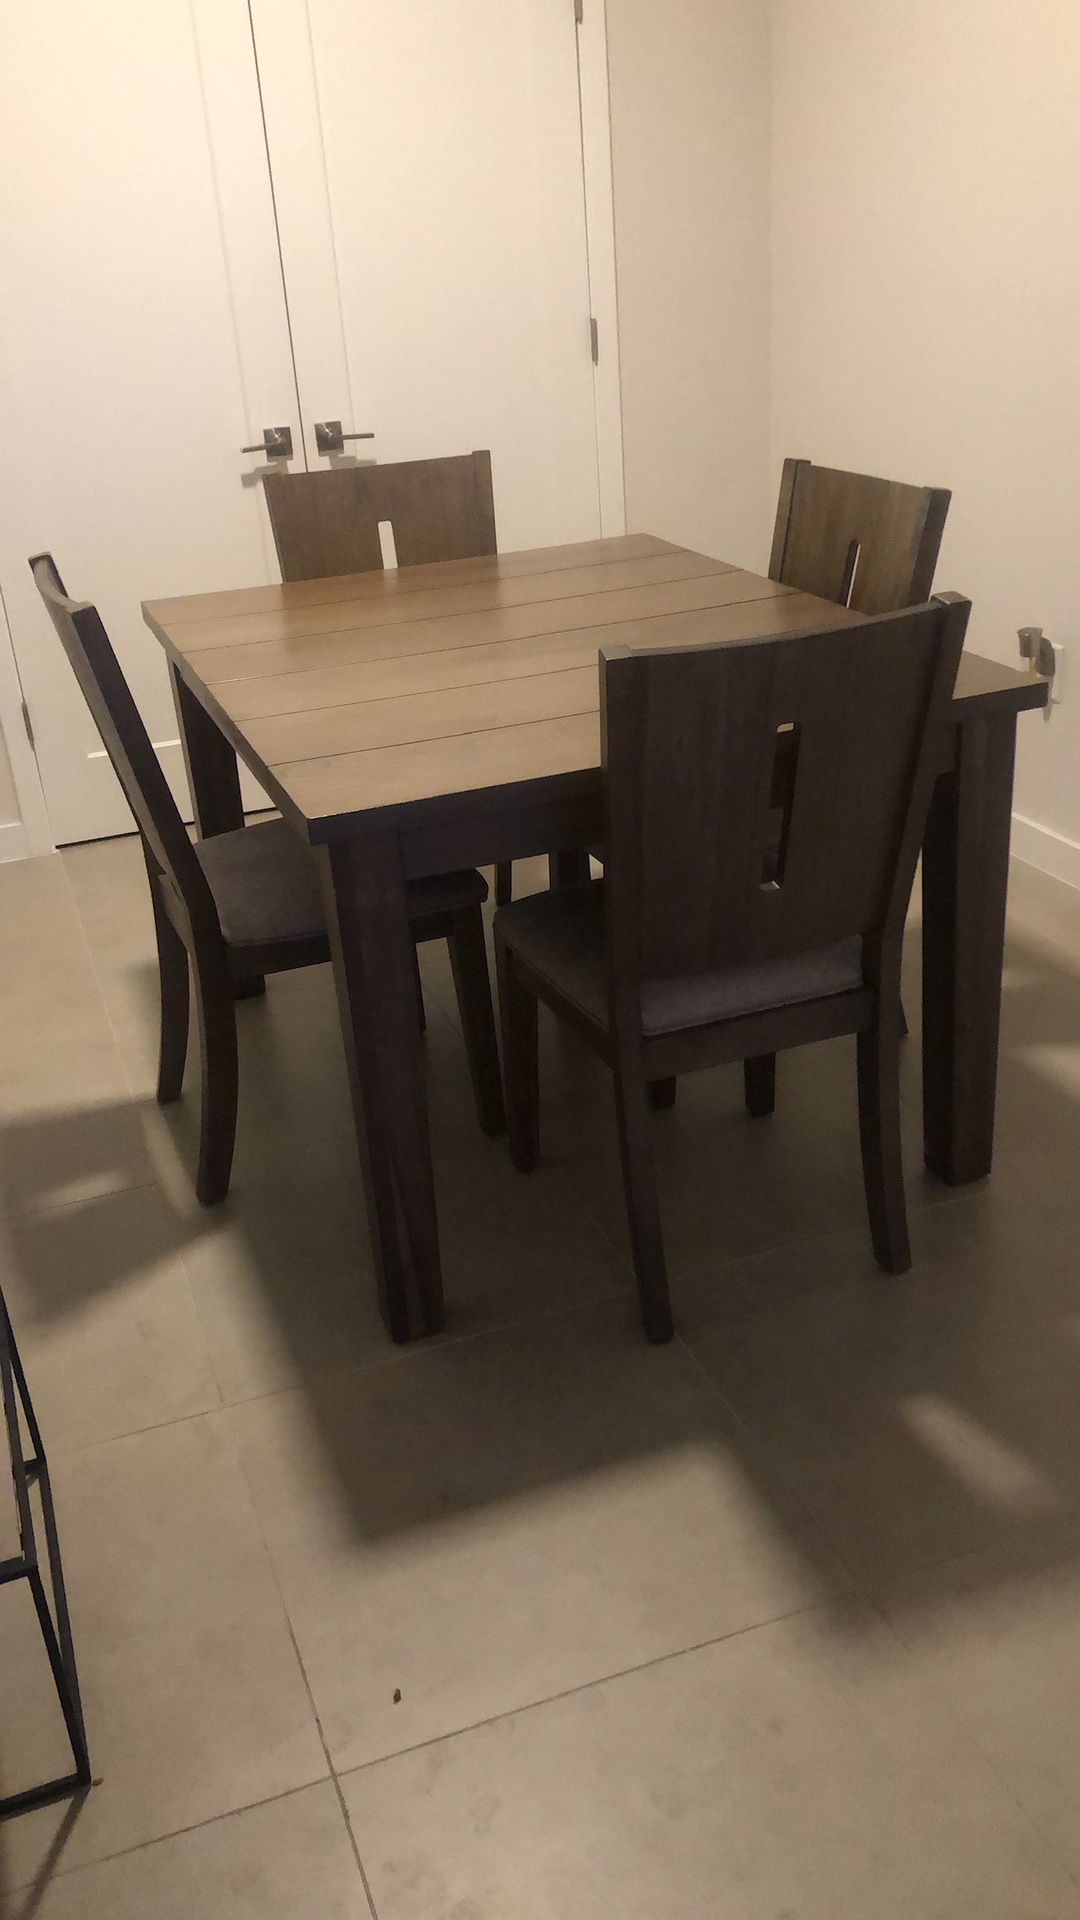 Dining Table and Chairs Set - 4 Chairs - Extendable